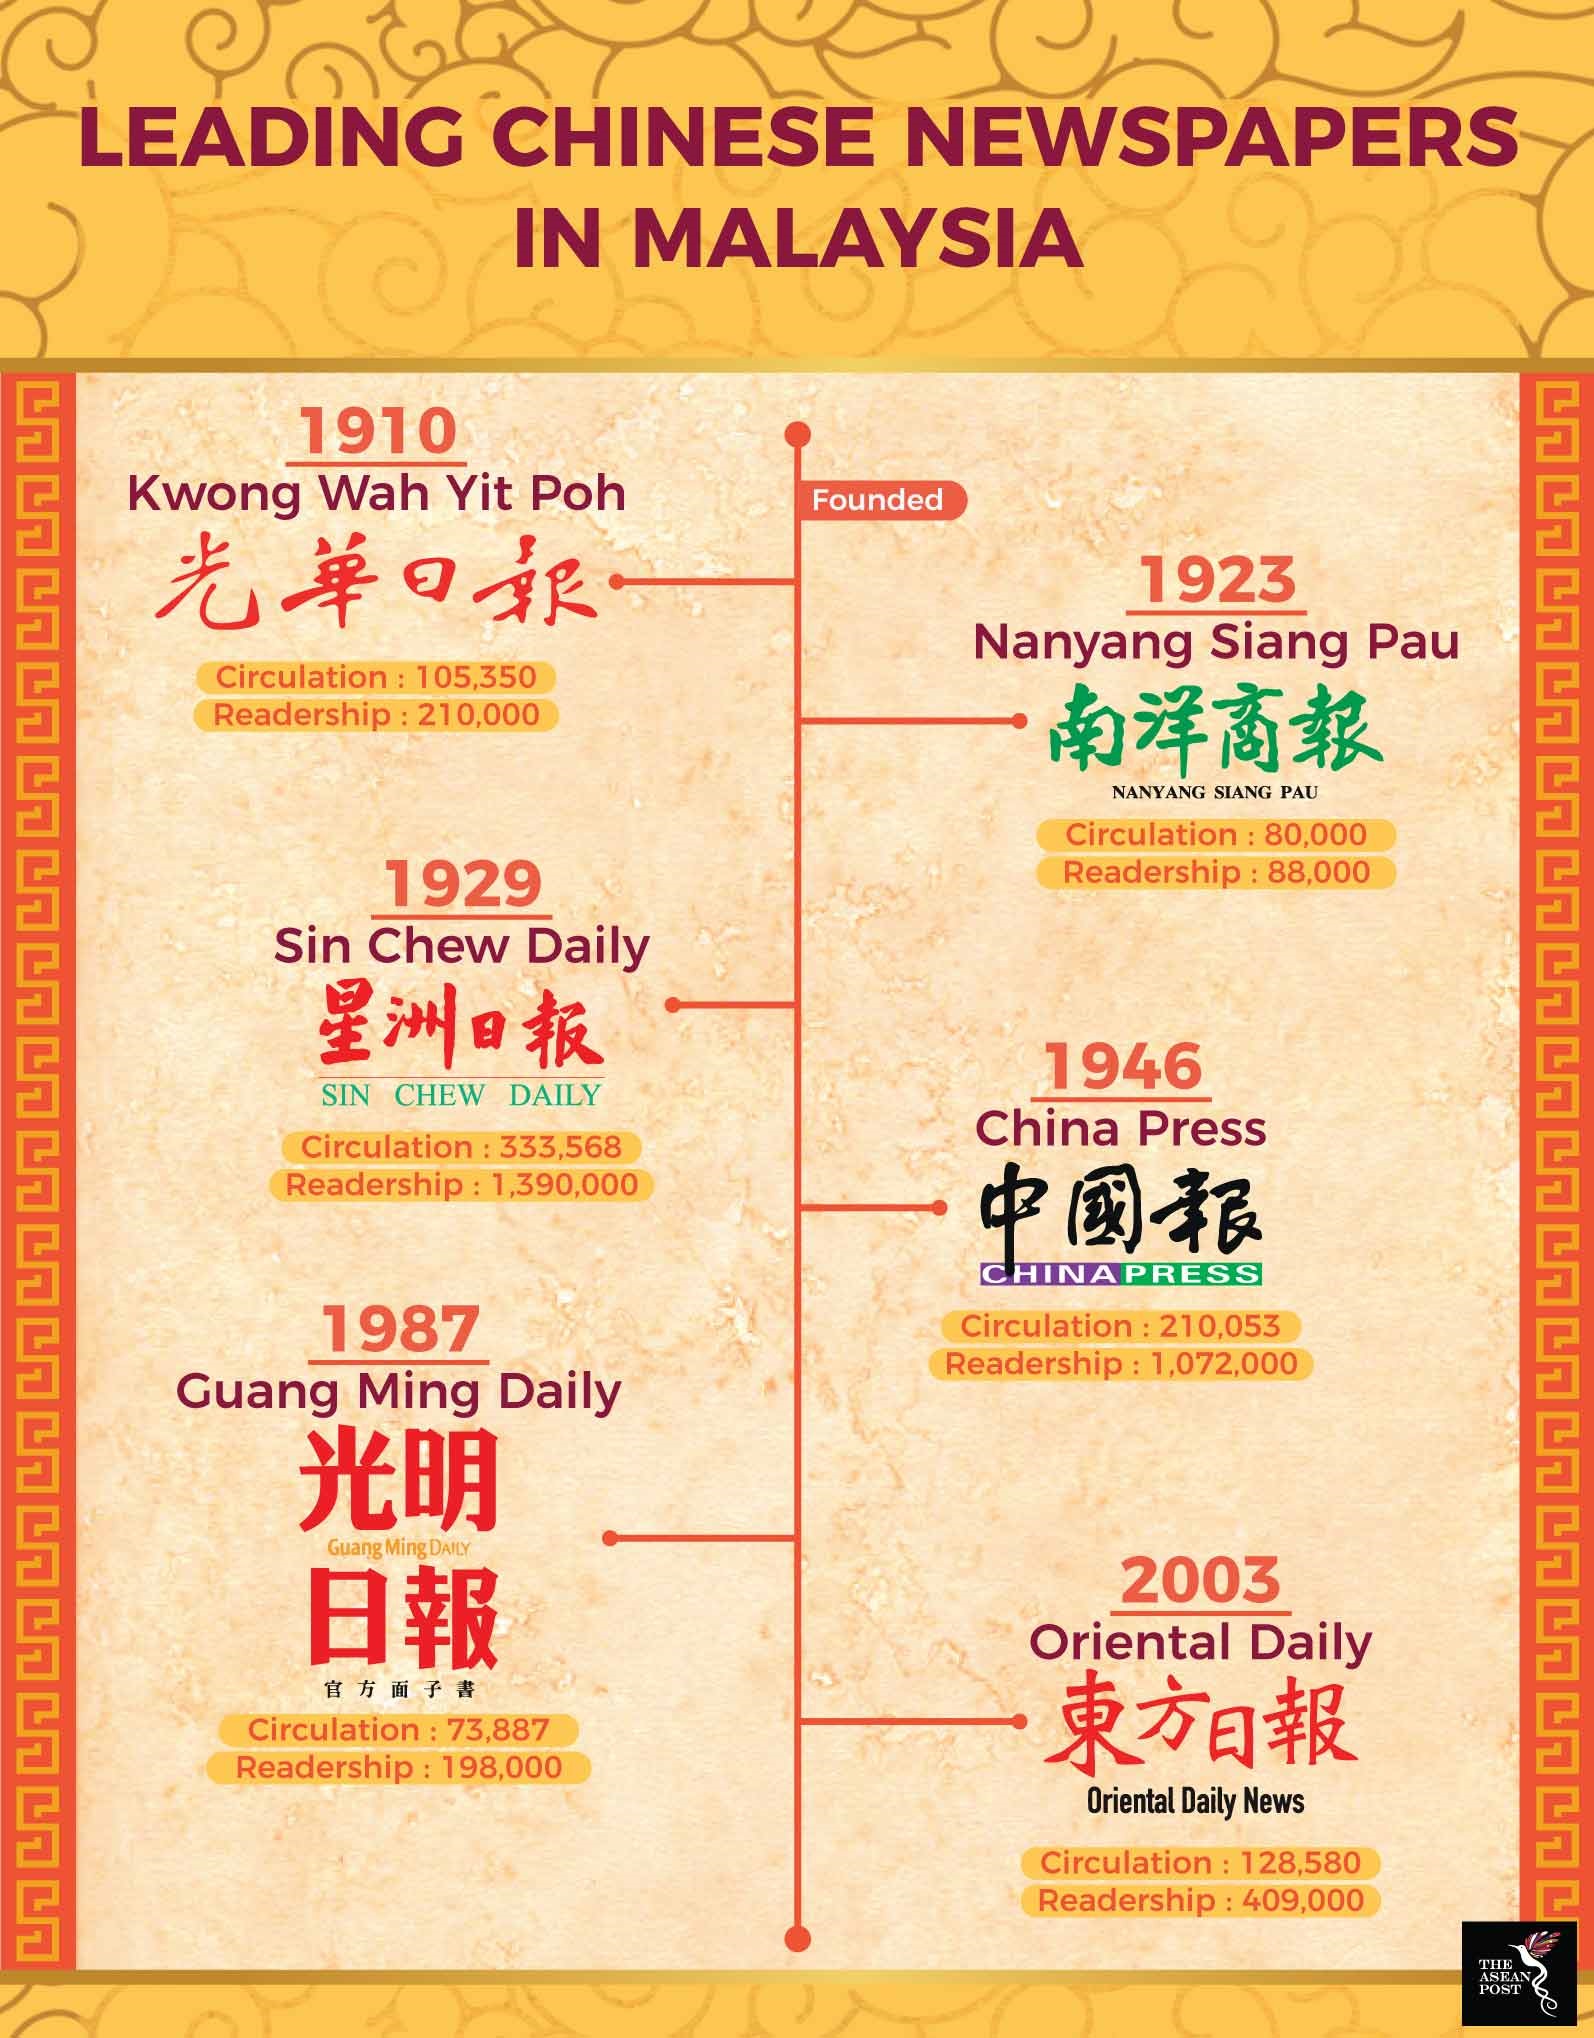 Chinese newspapers in Malaysia